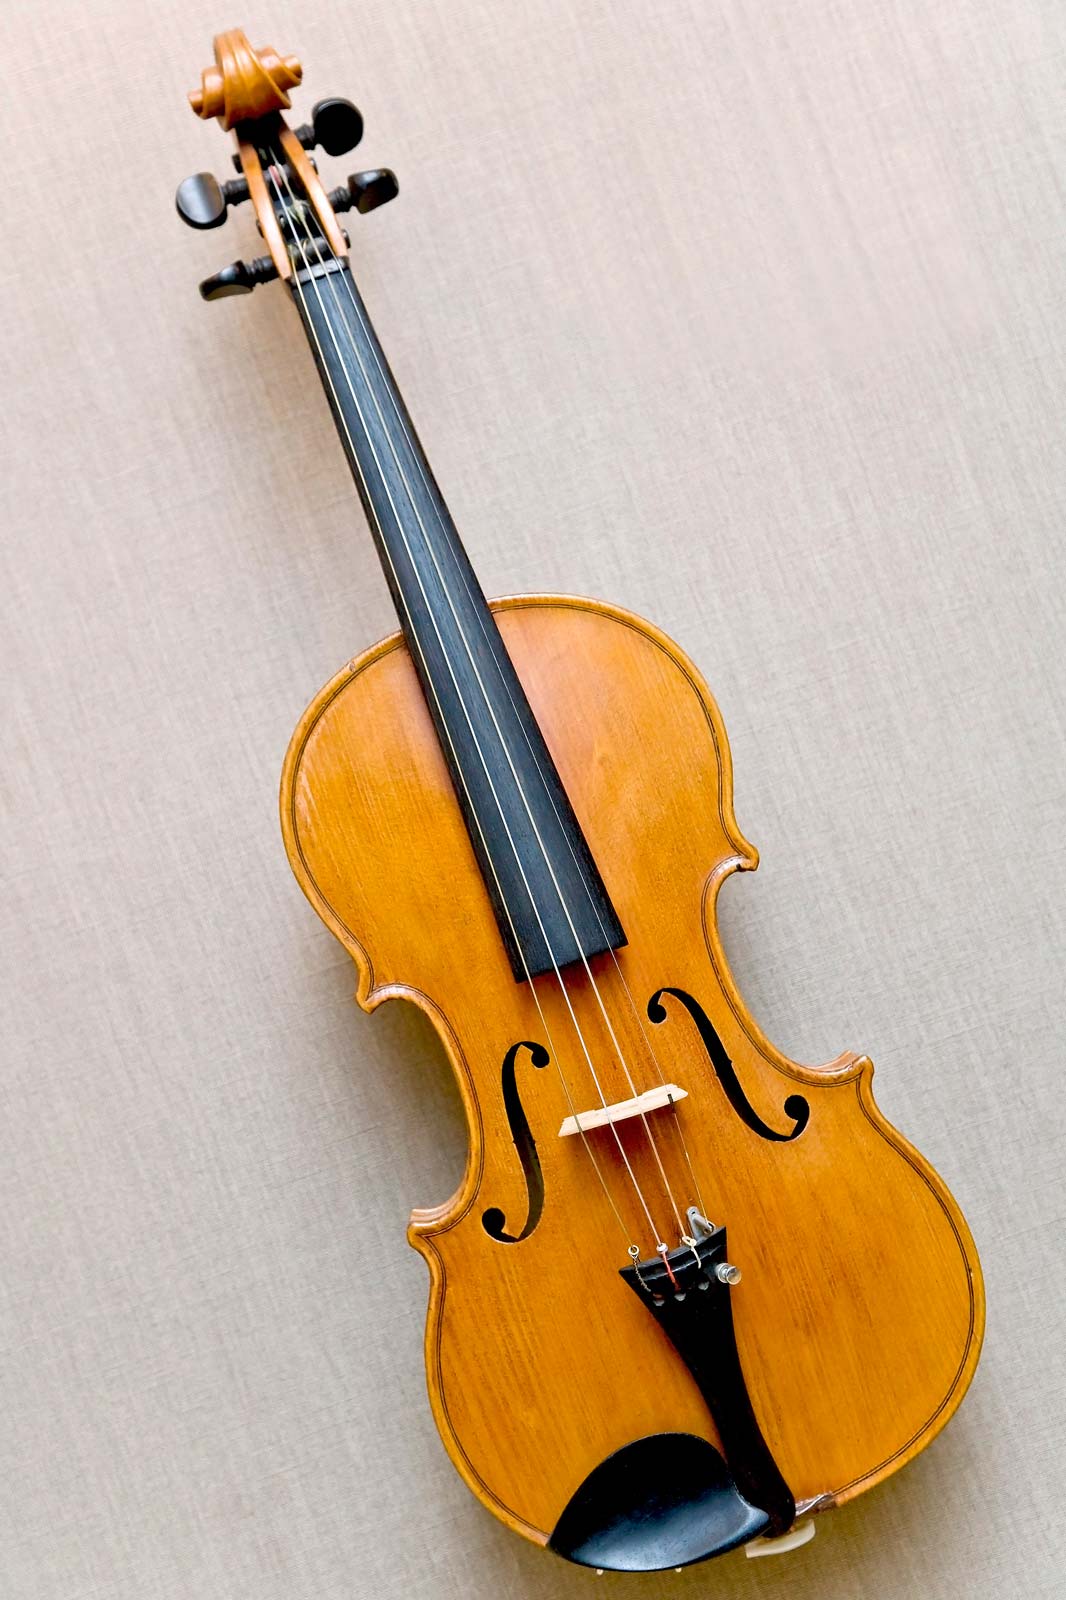 National instrument of Cyprus